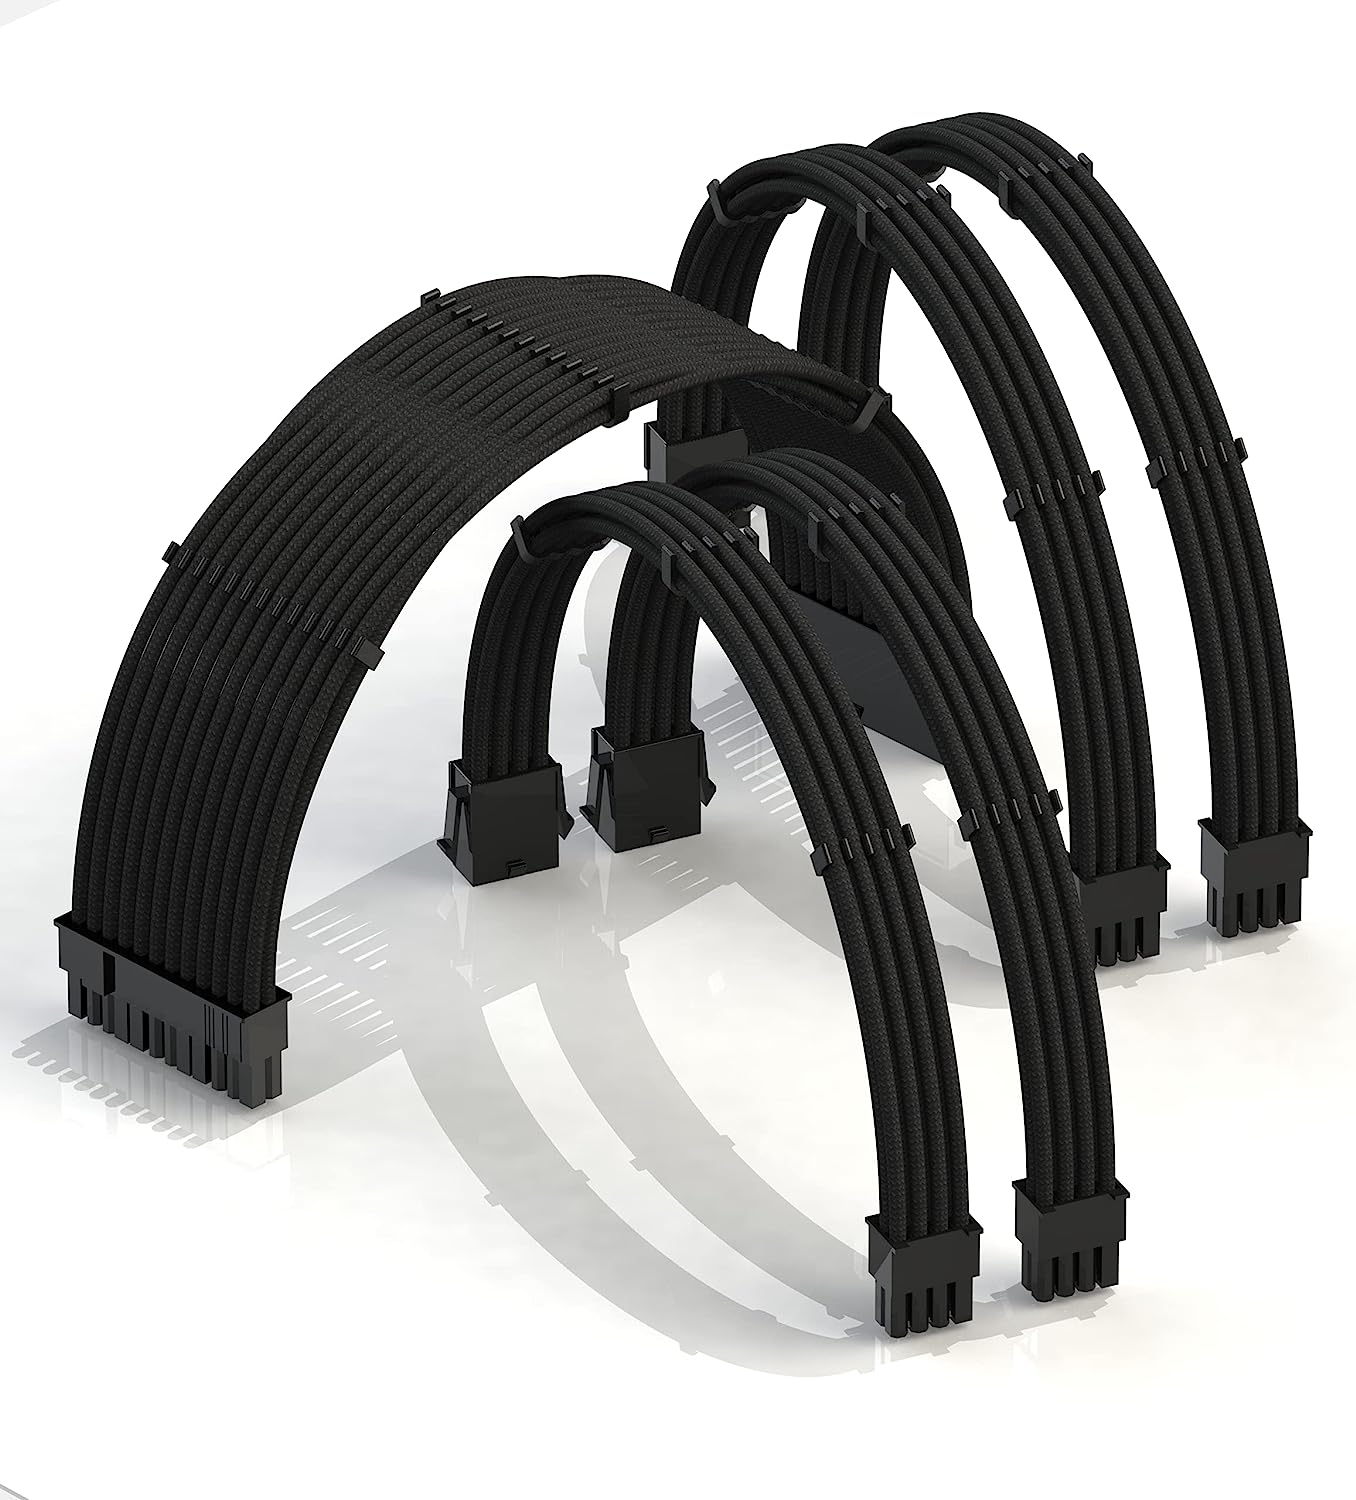 LINKUP - AVA 30cm PSU Cable Extension Sleeved Custom [...]